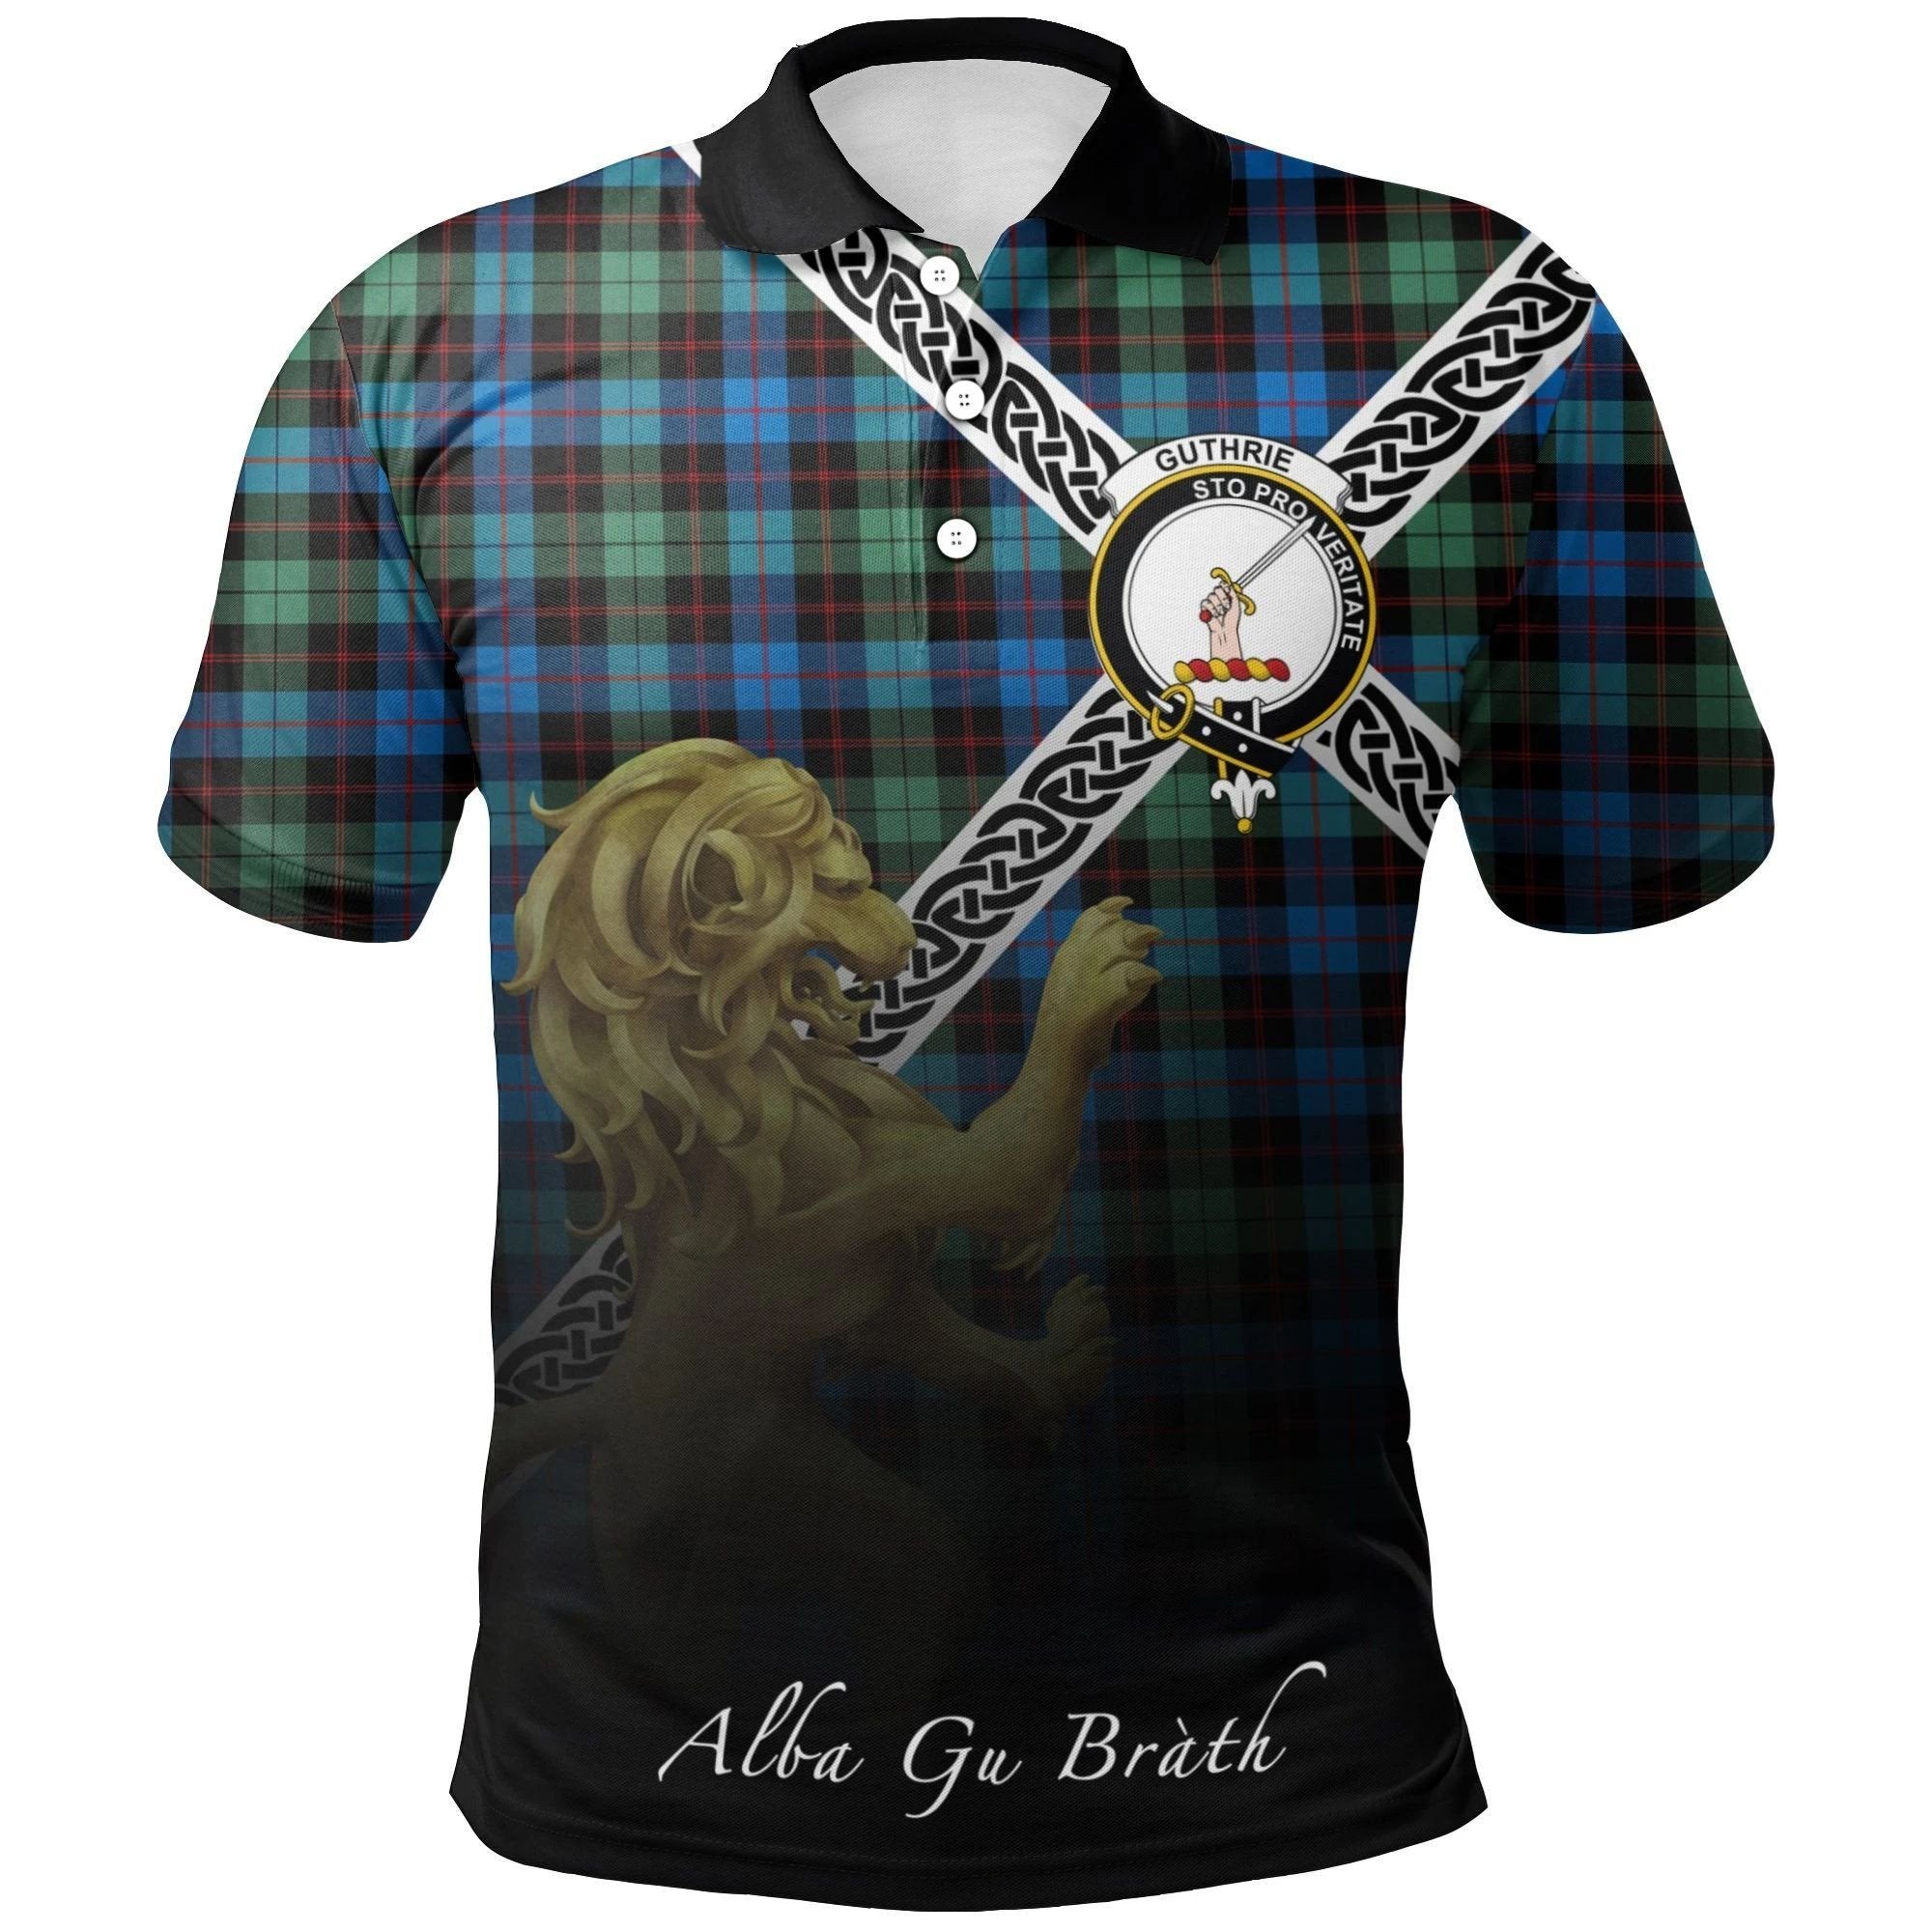 Guthrie Ancient Clan Polo Shirt, Scottish Tartan Guthrie Ancient Clans Polo Shirt Celtic Lion Style